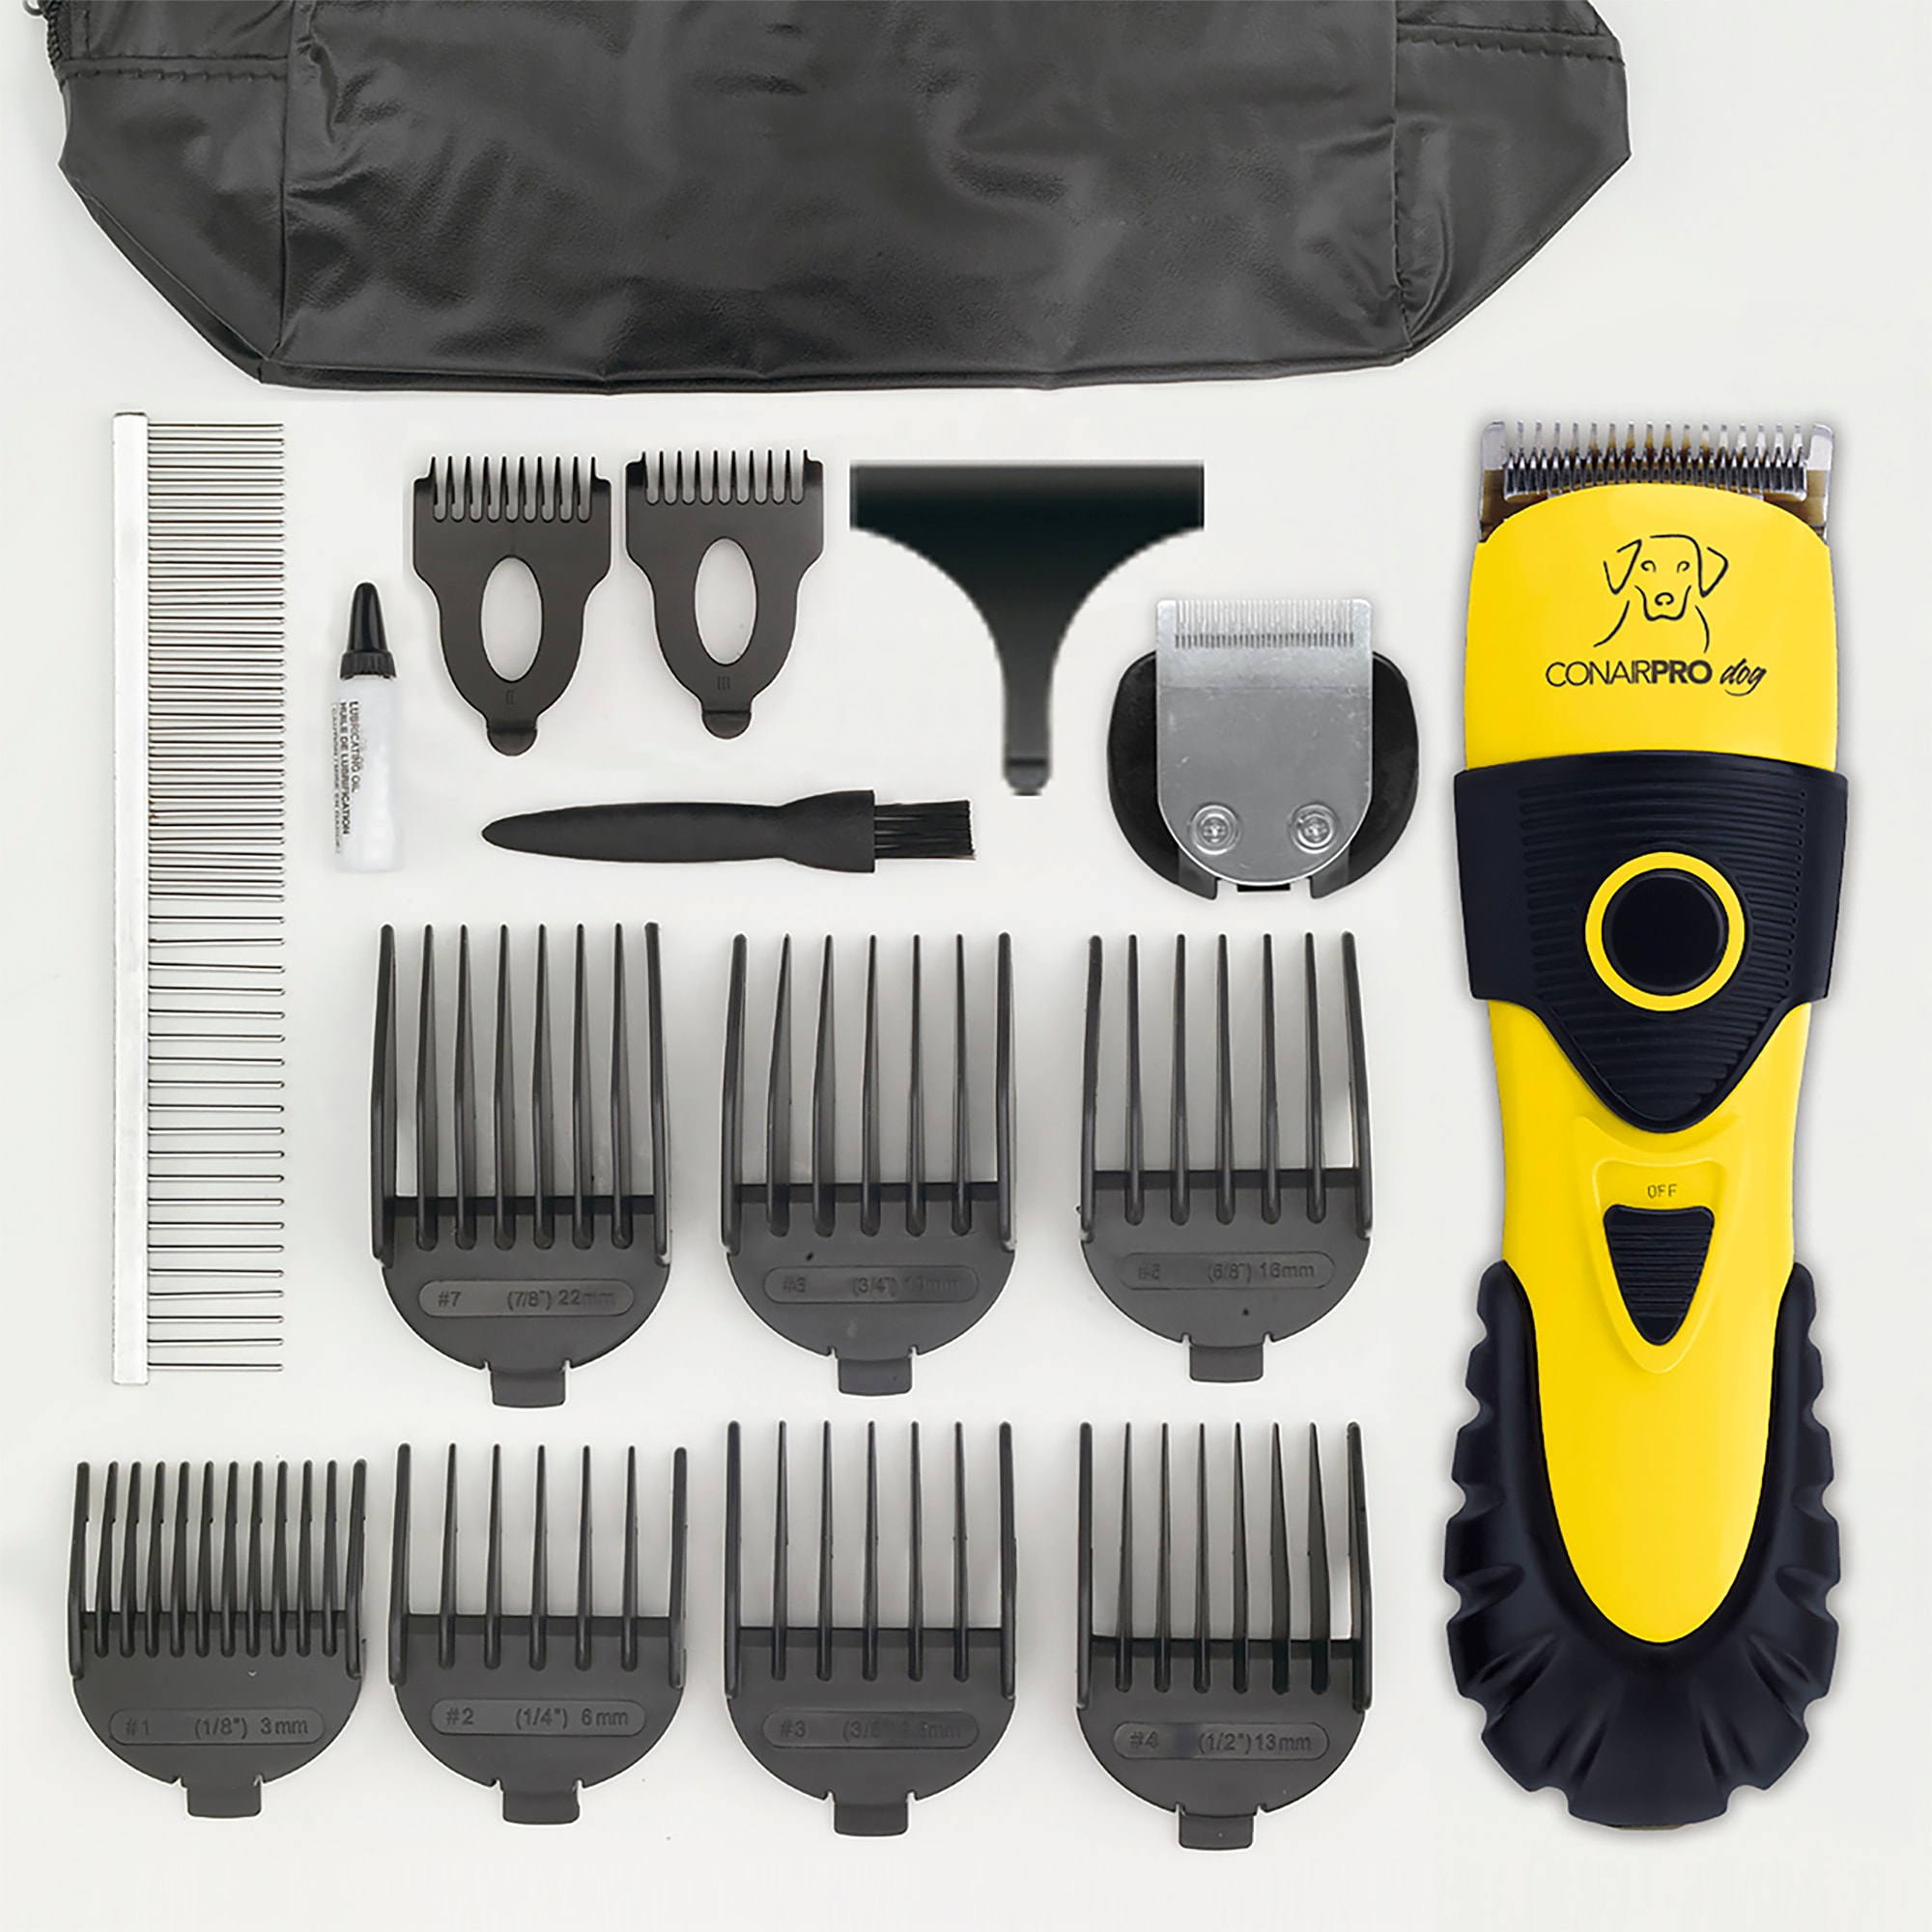 Pet Grooming Tools at Lowes.com